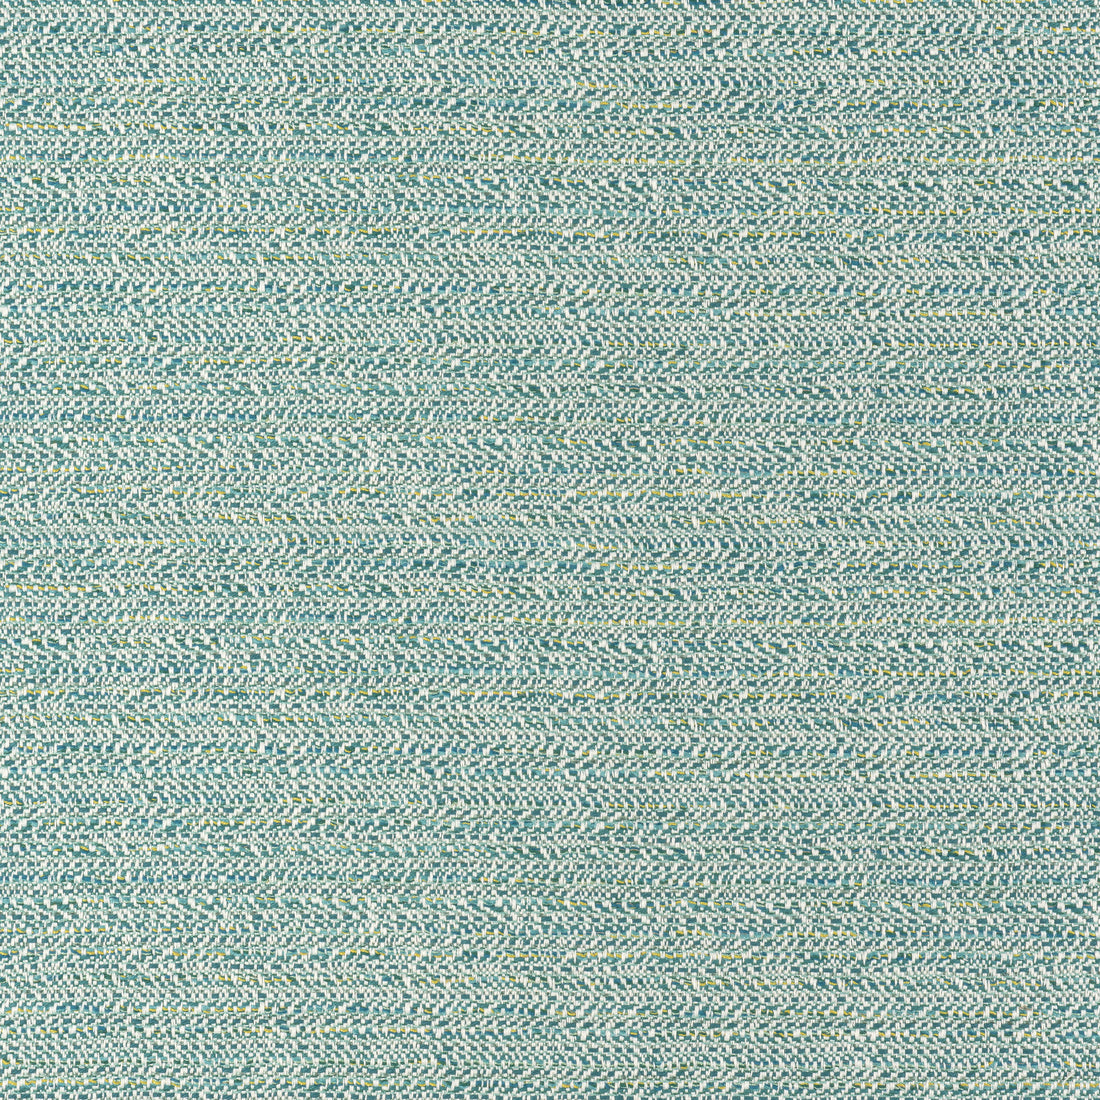 Elements fabric in peacock color - pattern number W75242 - by Thibaut in the Elements collection